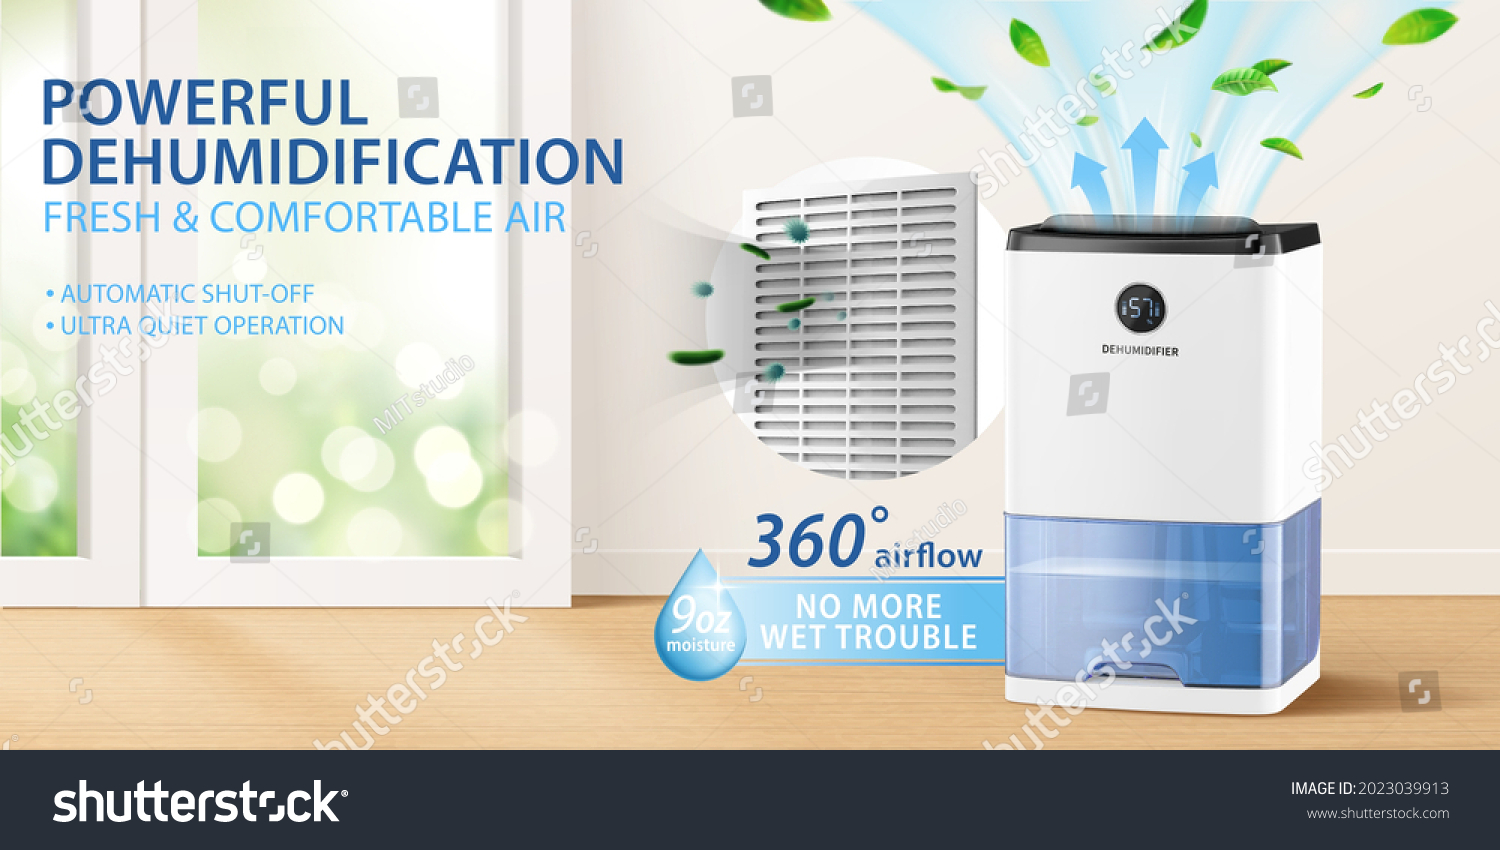 Ad banner design for dehumidifier or air purifier. 3d illustration of house appliance purifying air for house living room. Concept of allergy or covid prevention. #2023039913